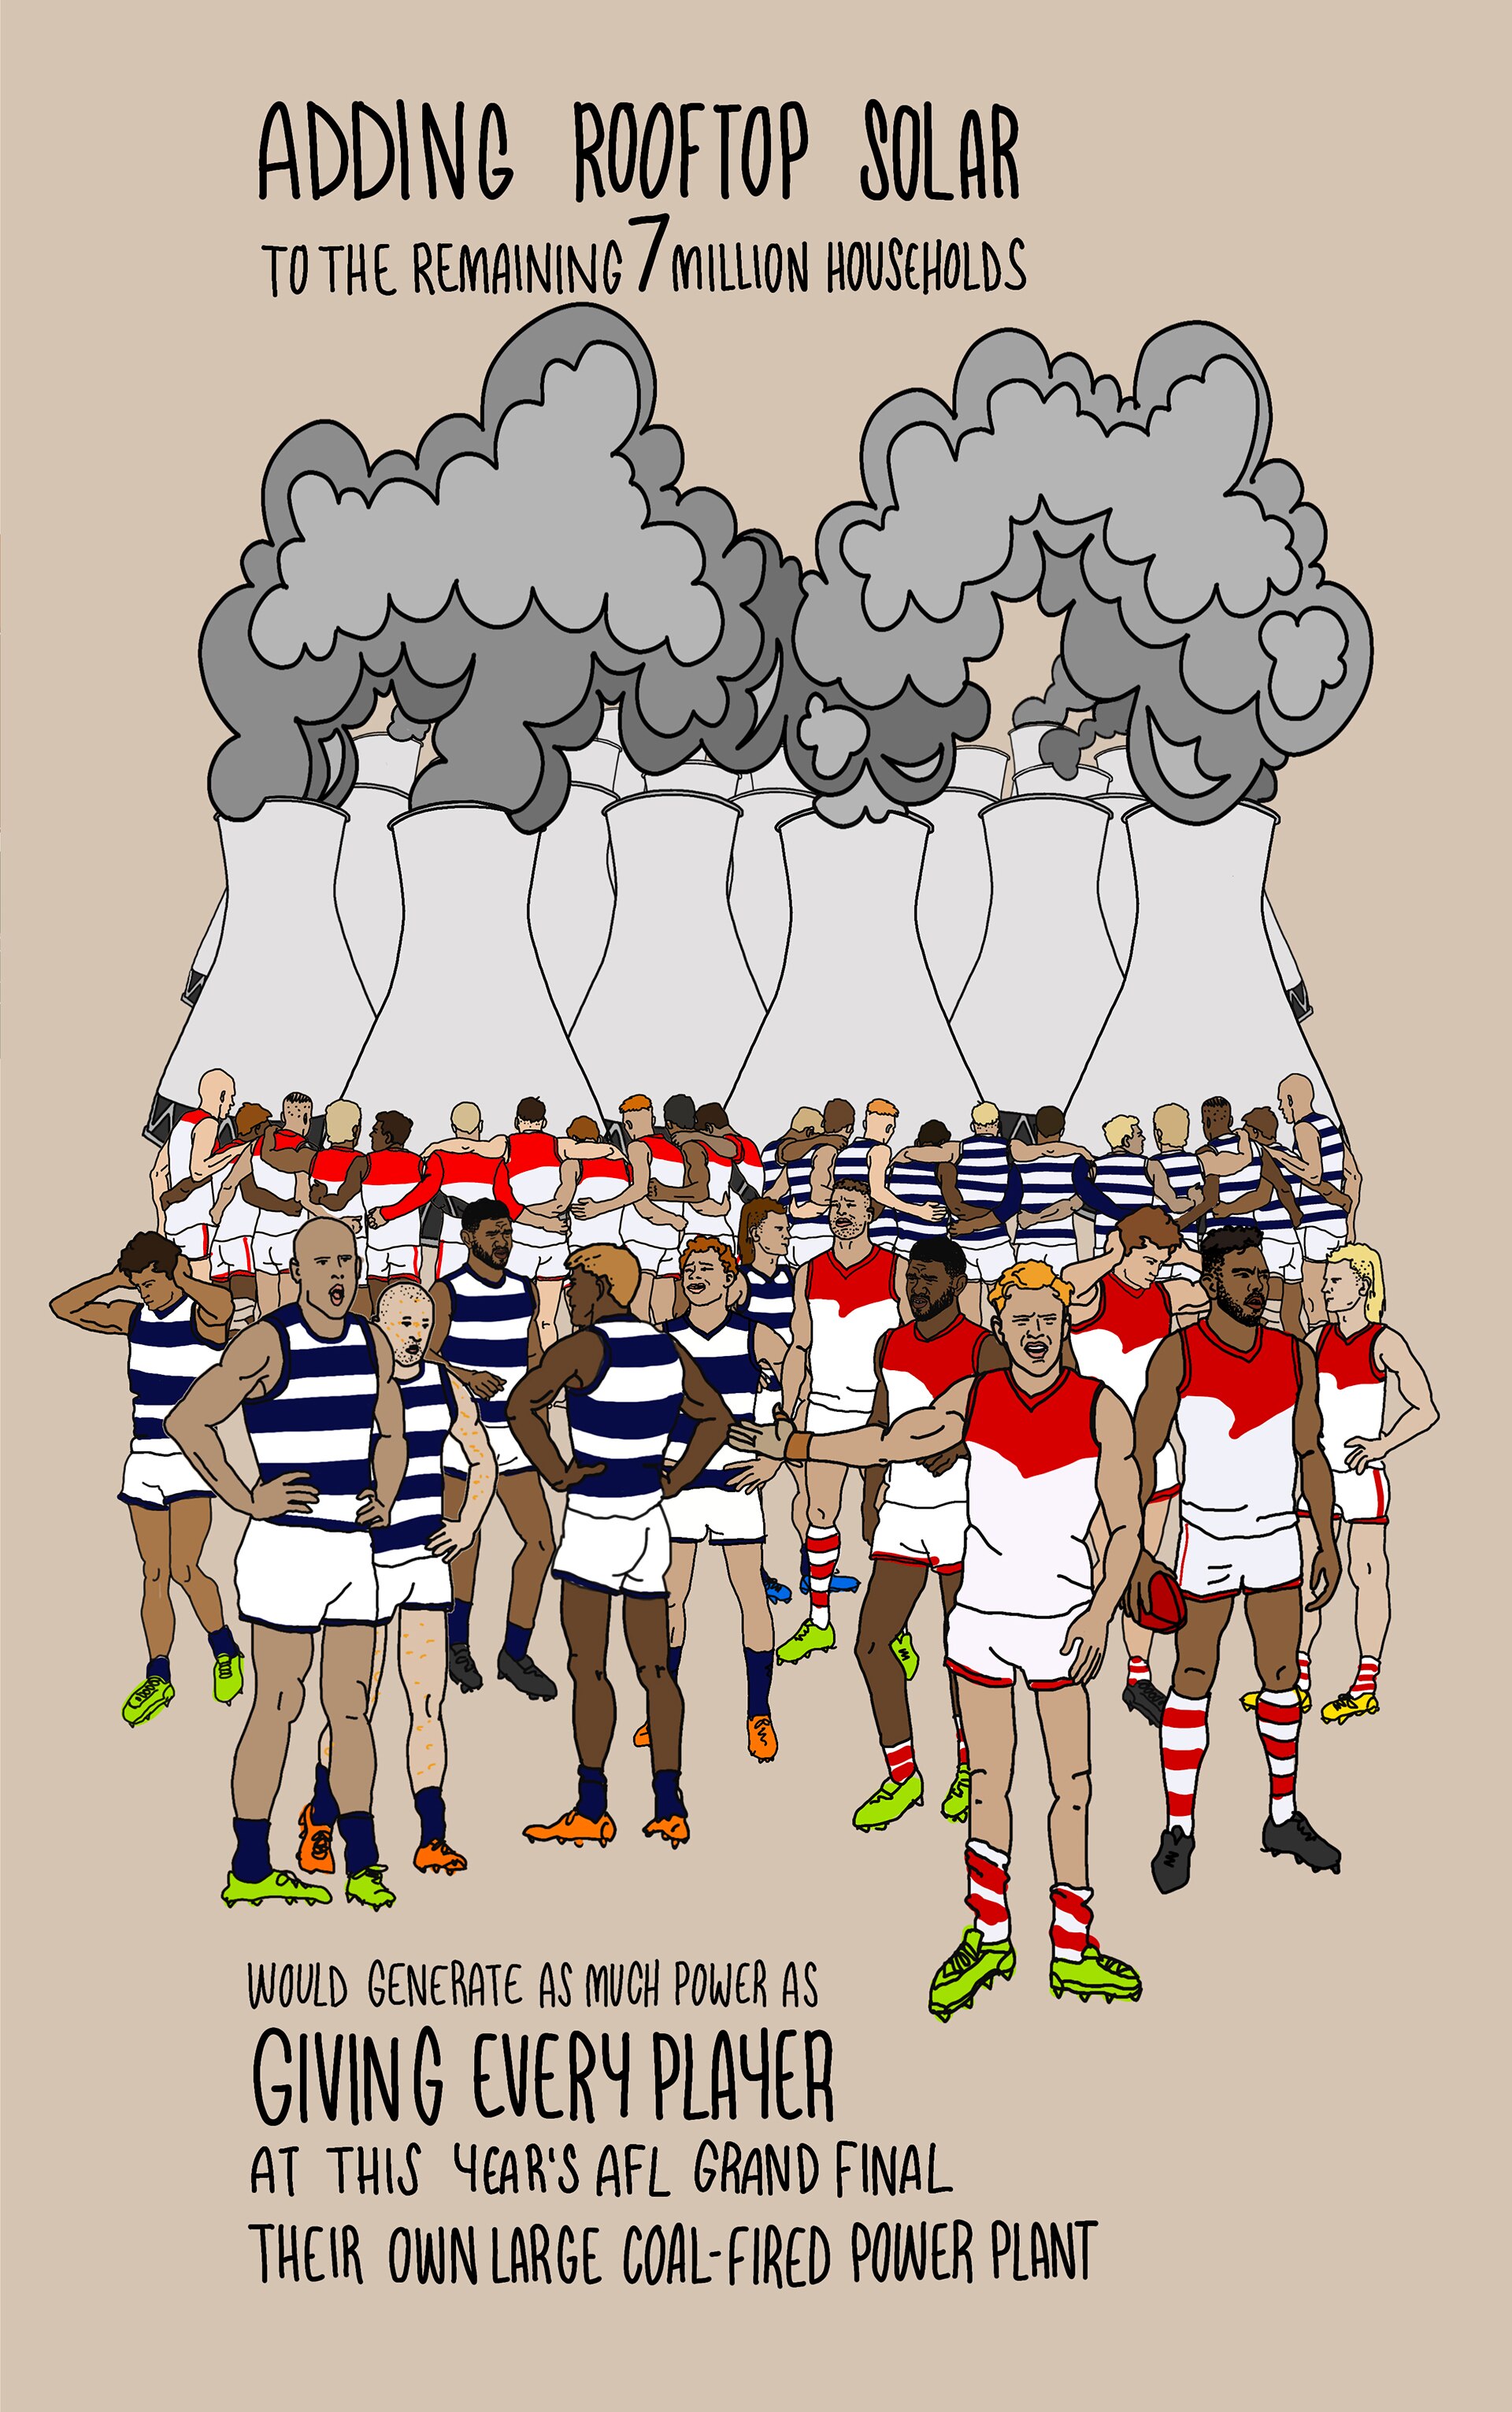 A crowd of several dozen footy players standing in front of a coal-fired power plant smoke stacks